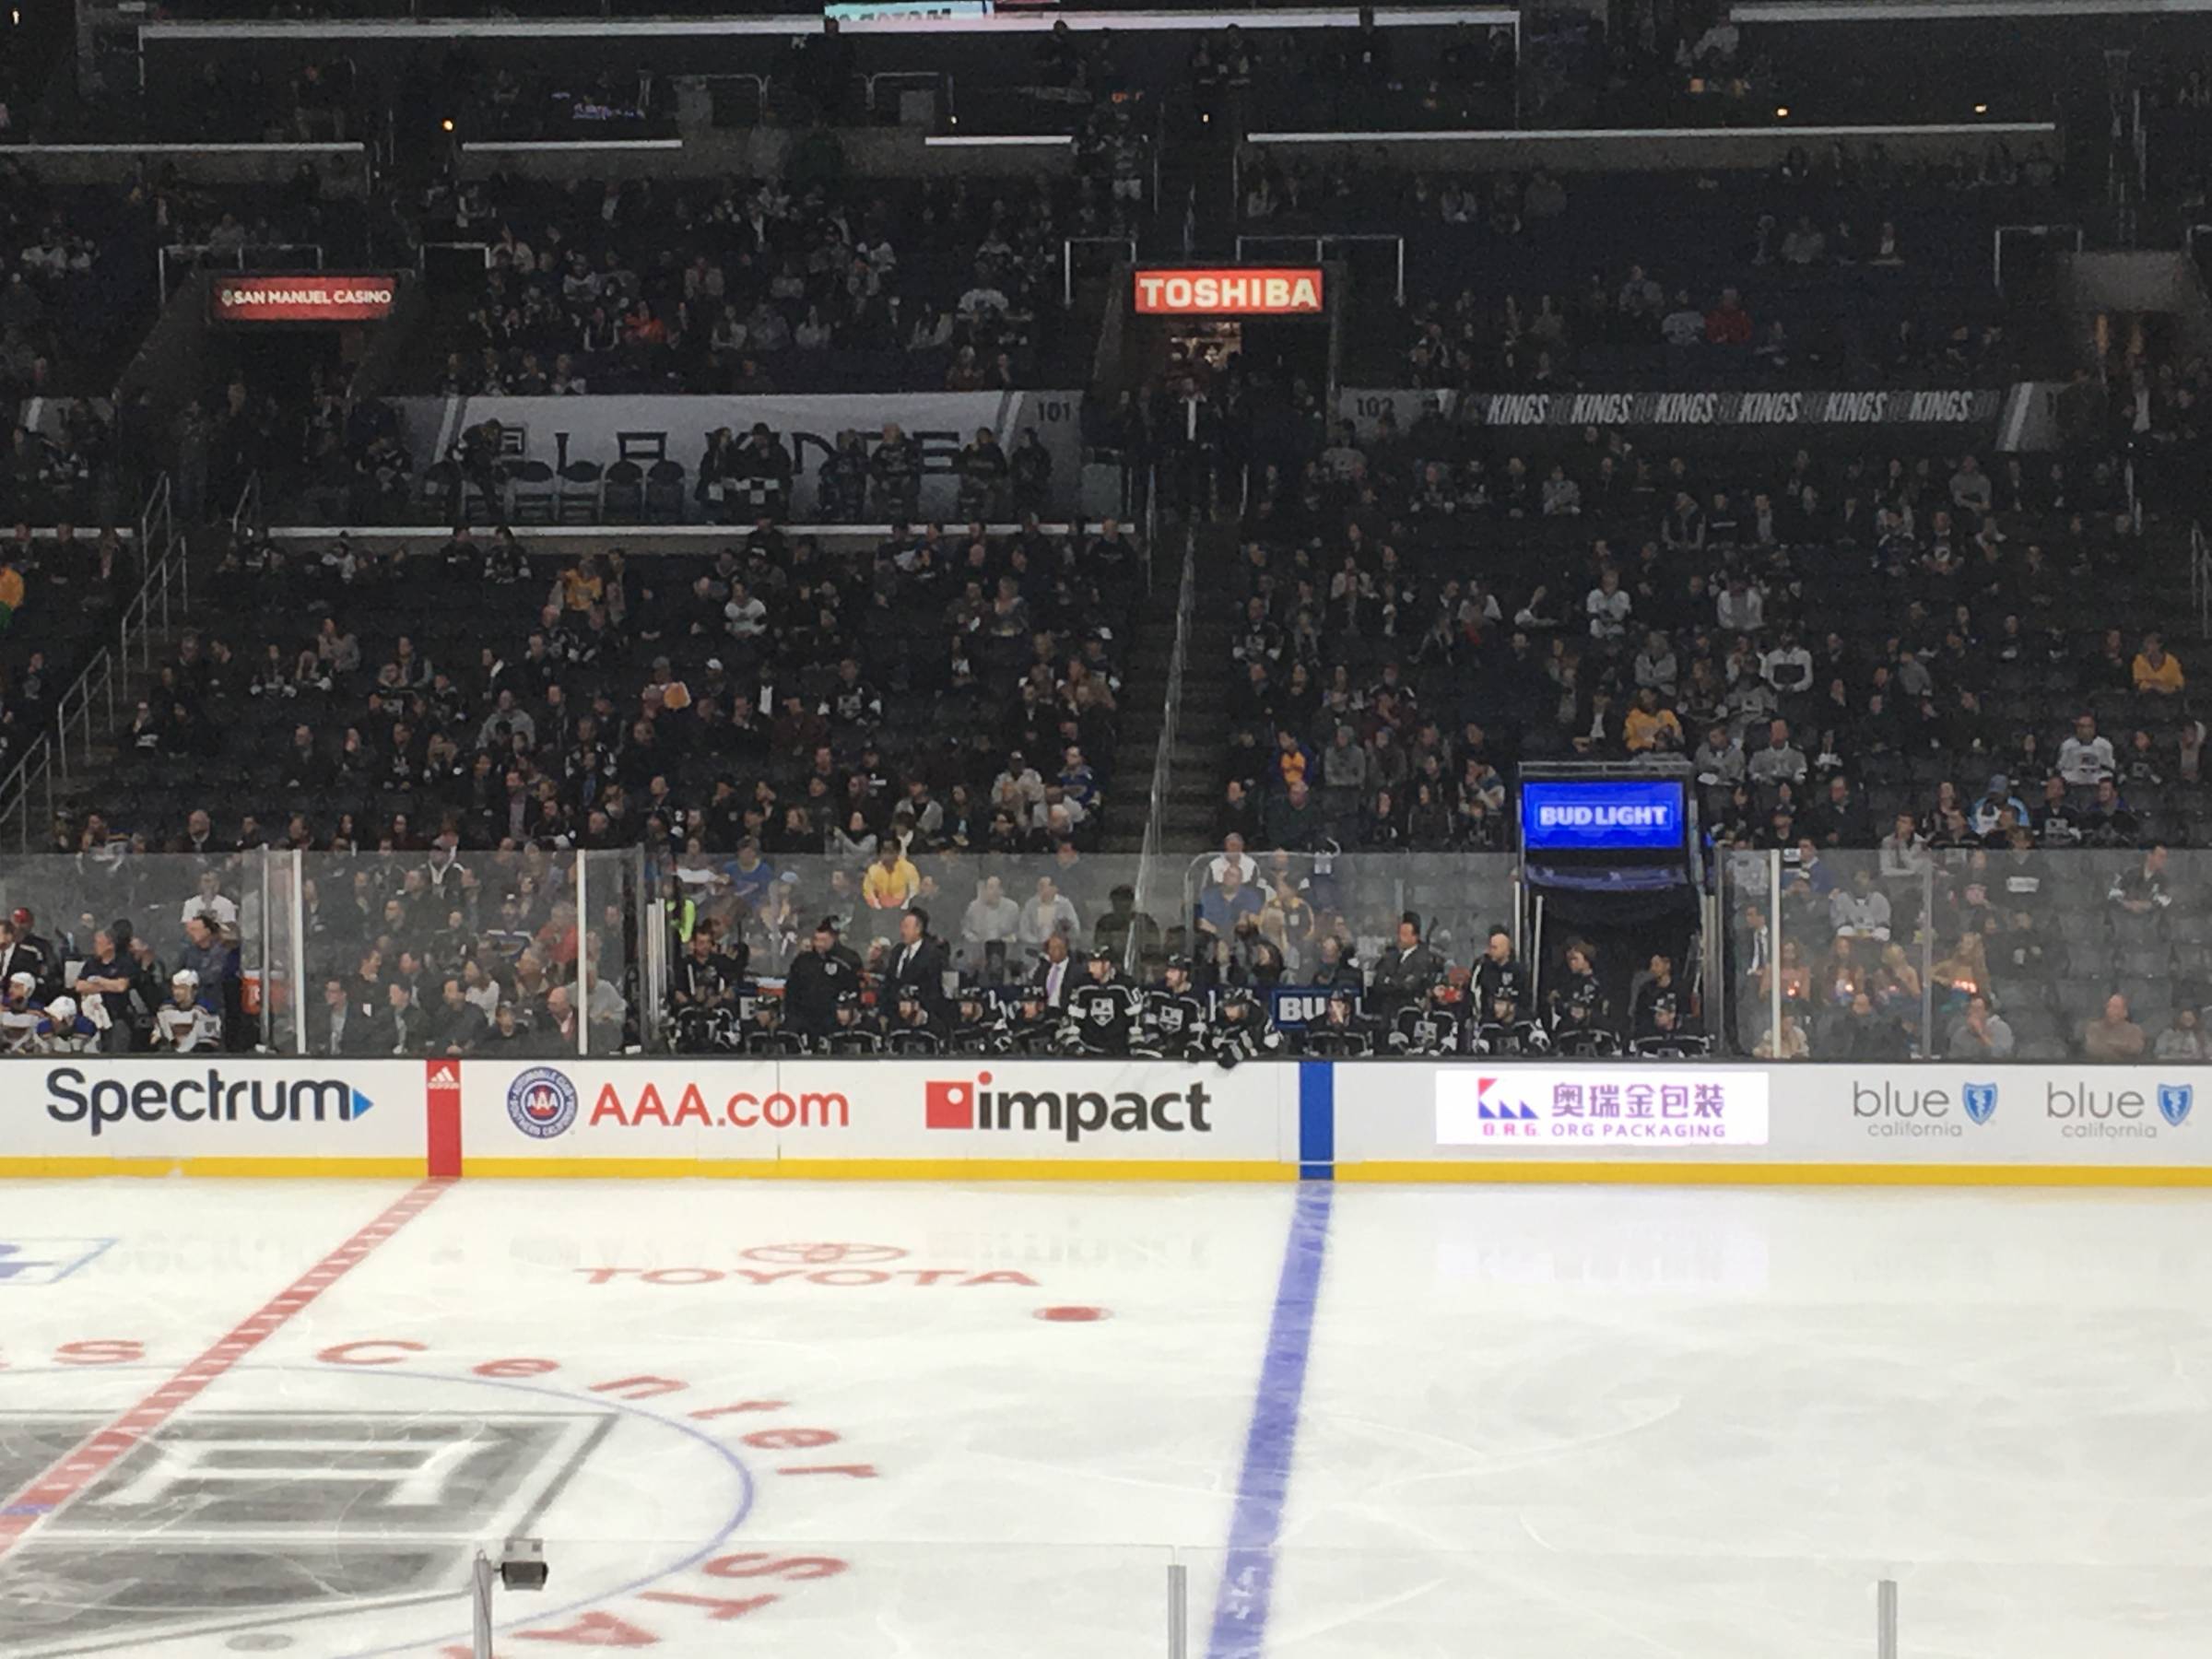 Home Bench at the Staples Center